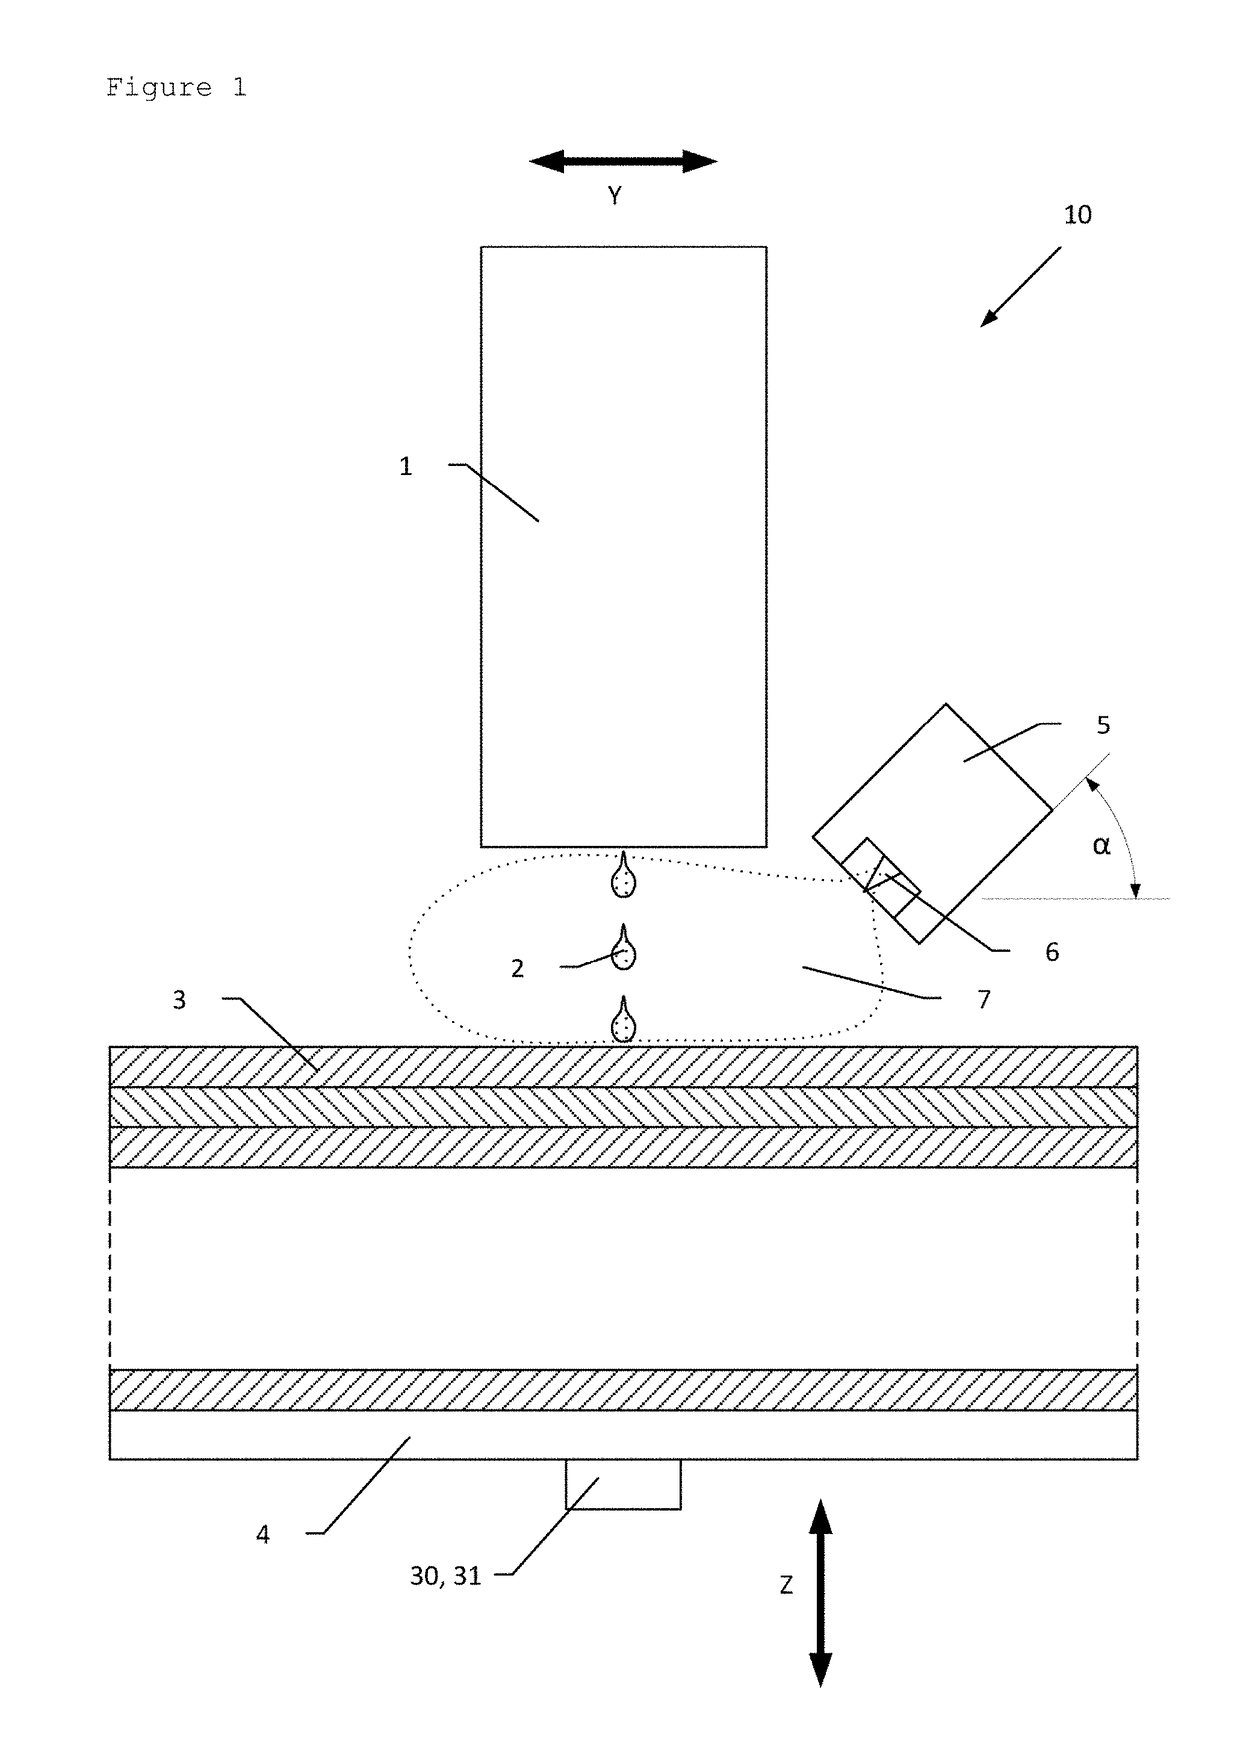 Method for producing silicone elastomer articles with elevated print quality